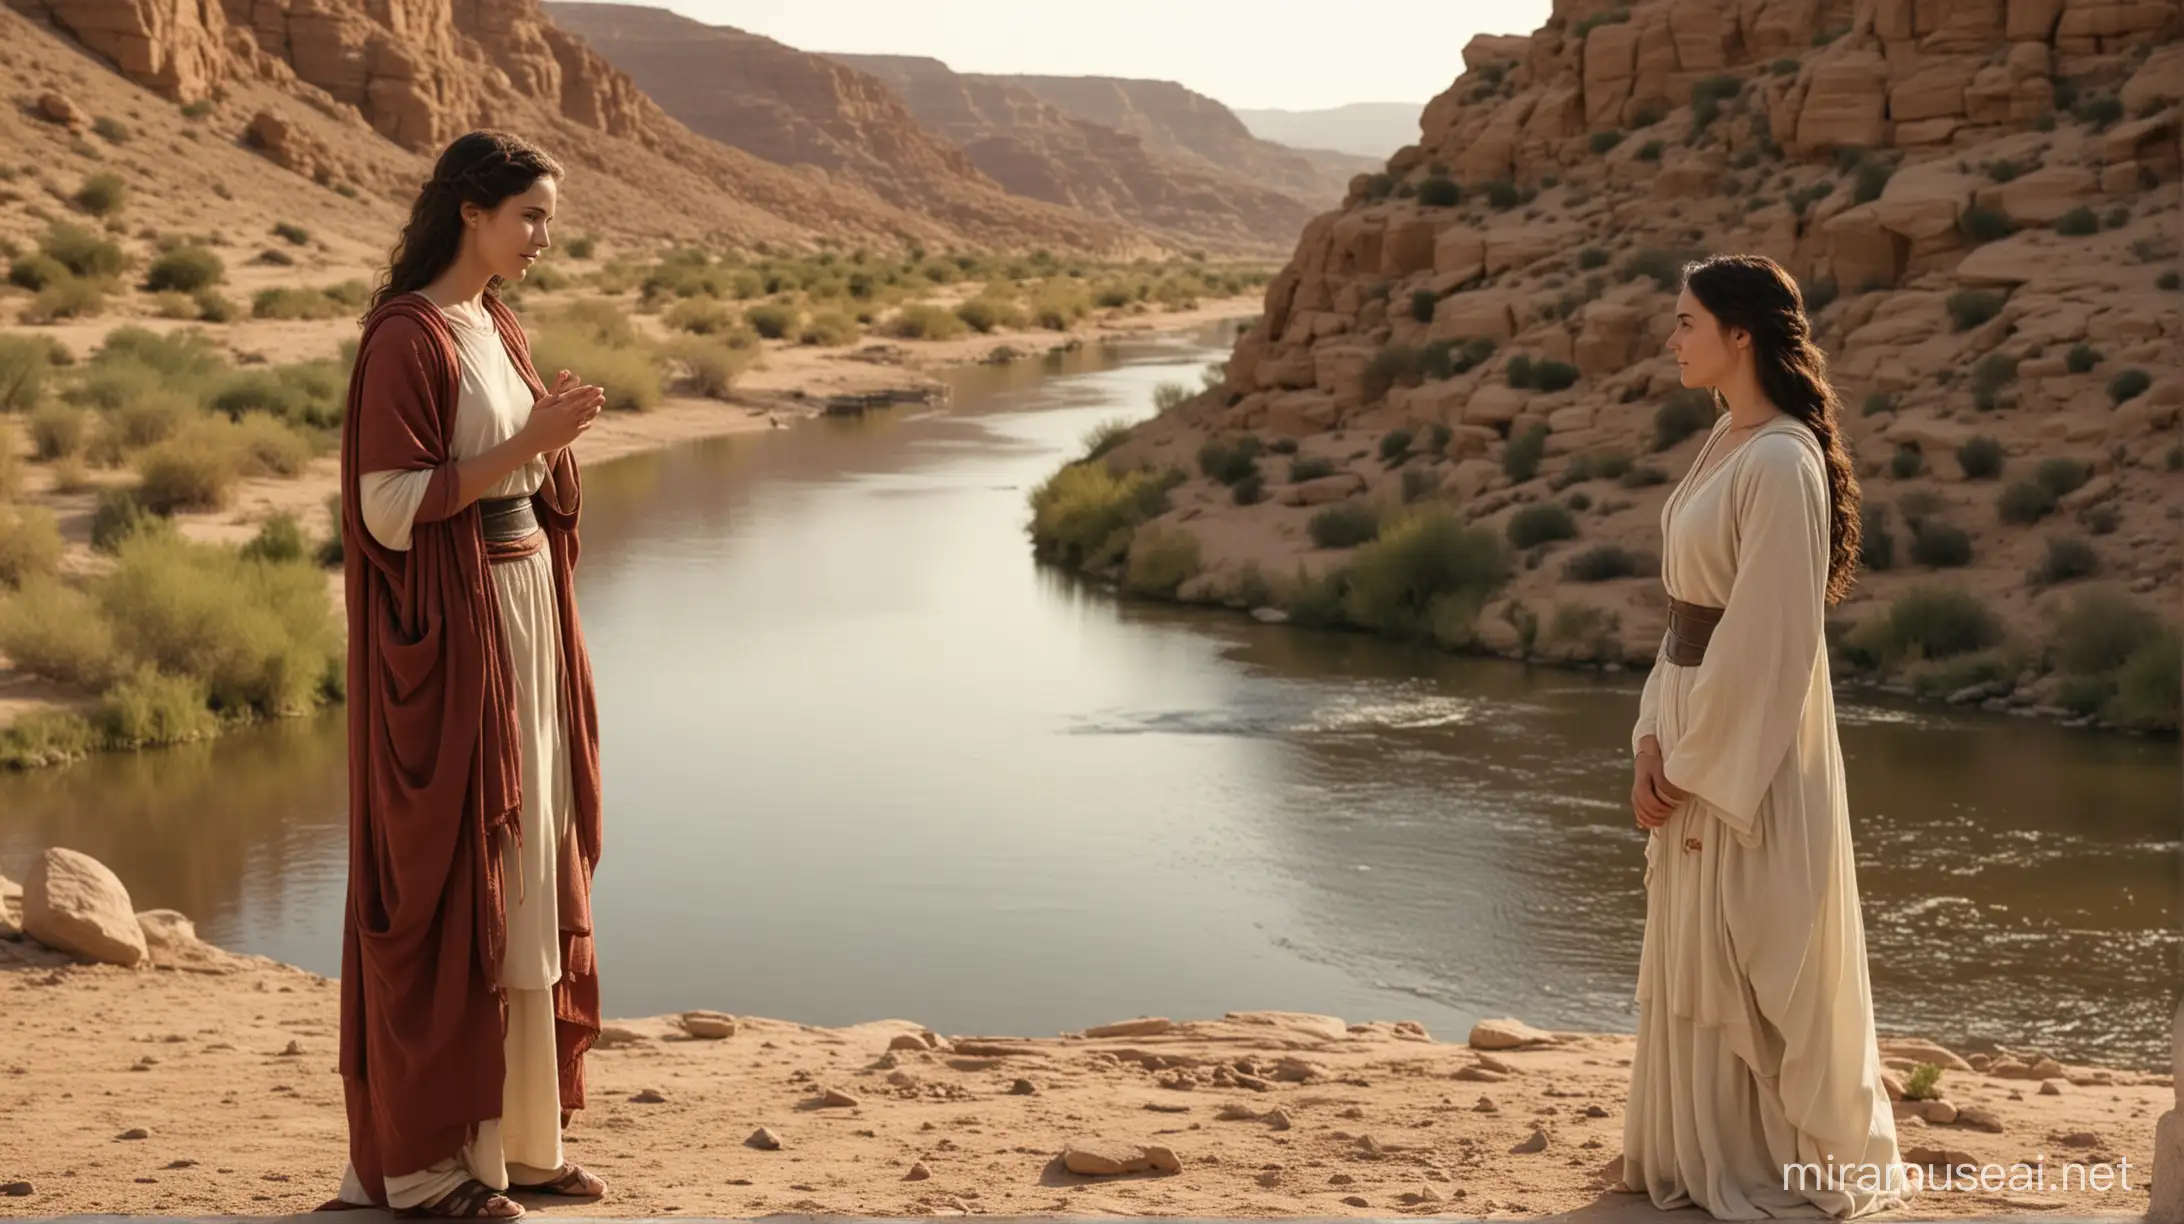 An angle of the Lord talks to a young attractive woman near a river, in the biblical era set in the desert area